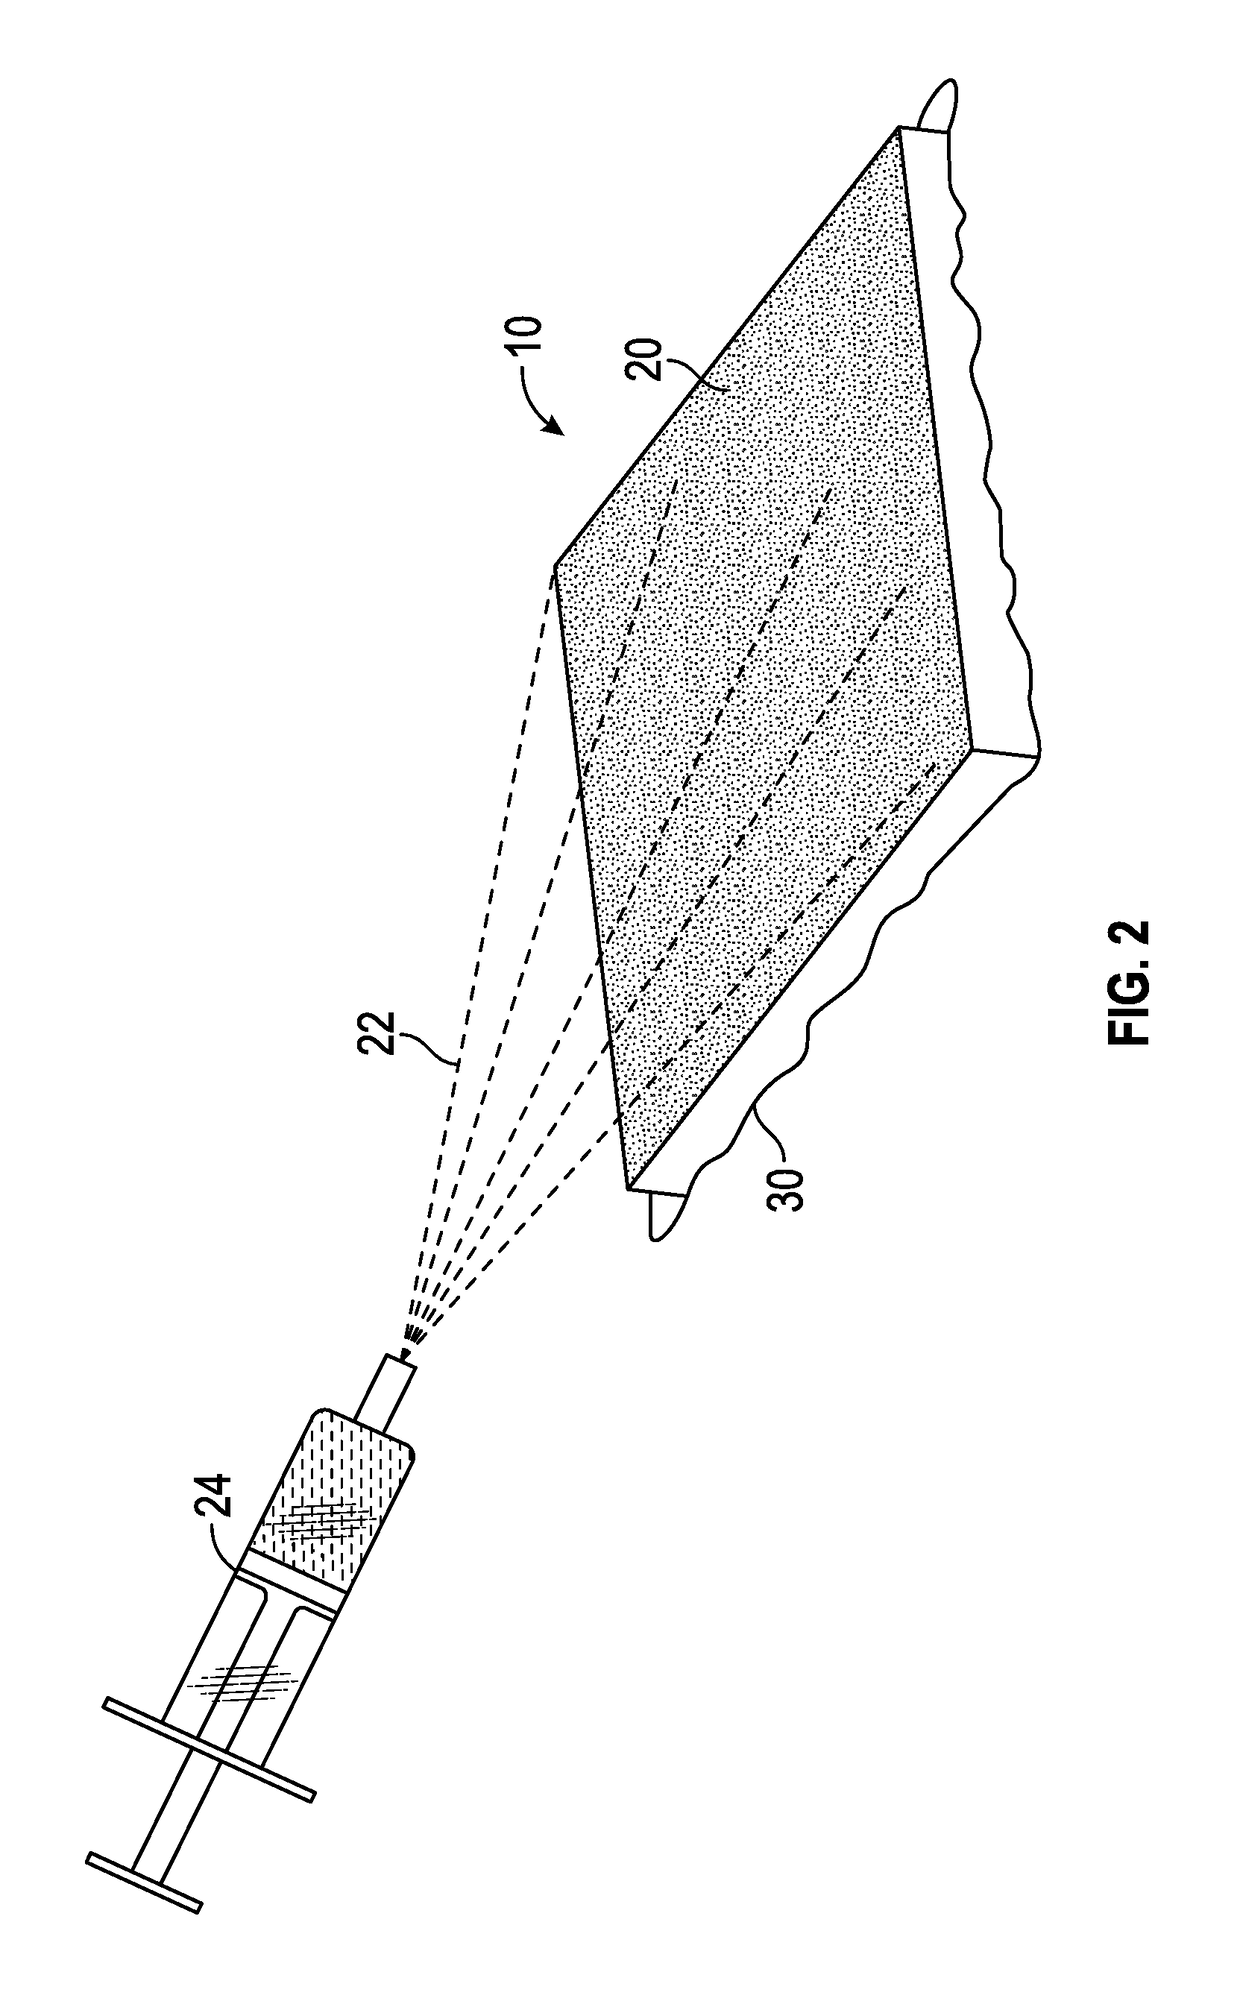 Scaffold-based wound care delivery system and method